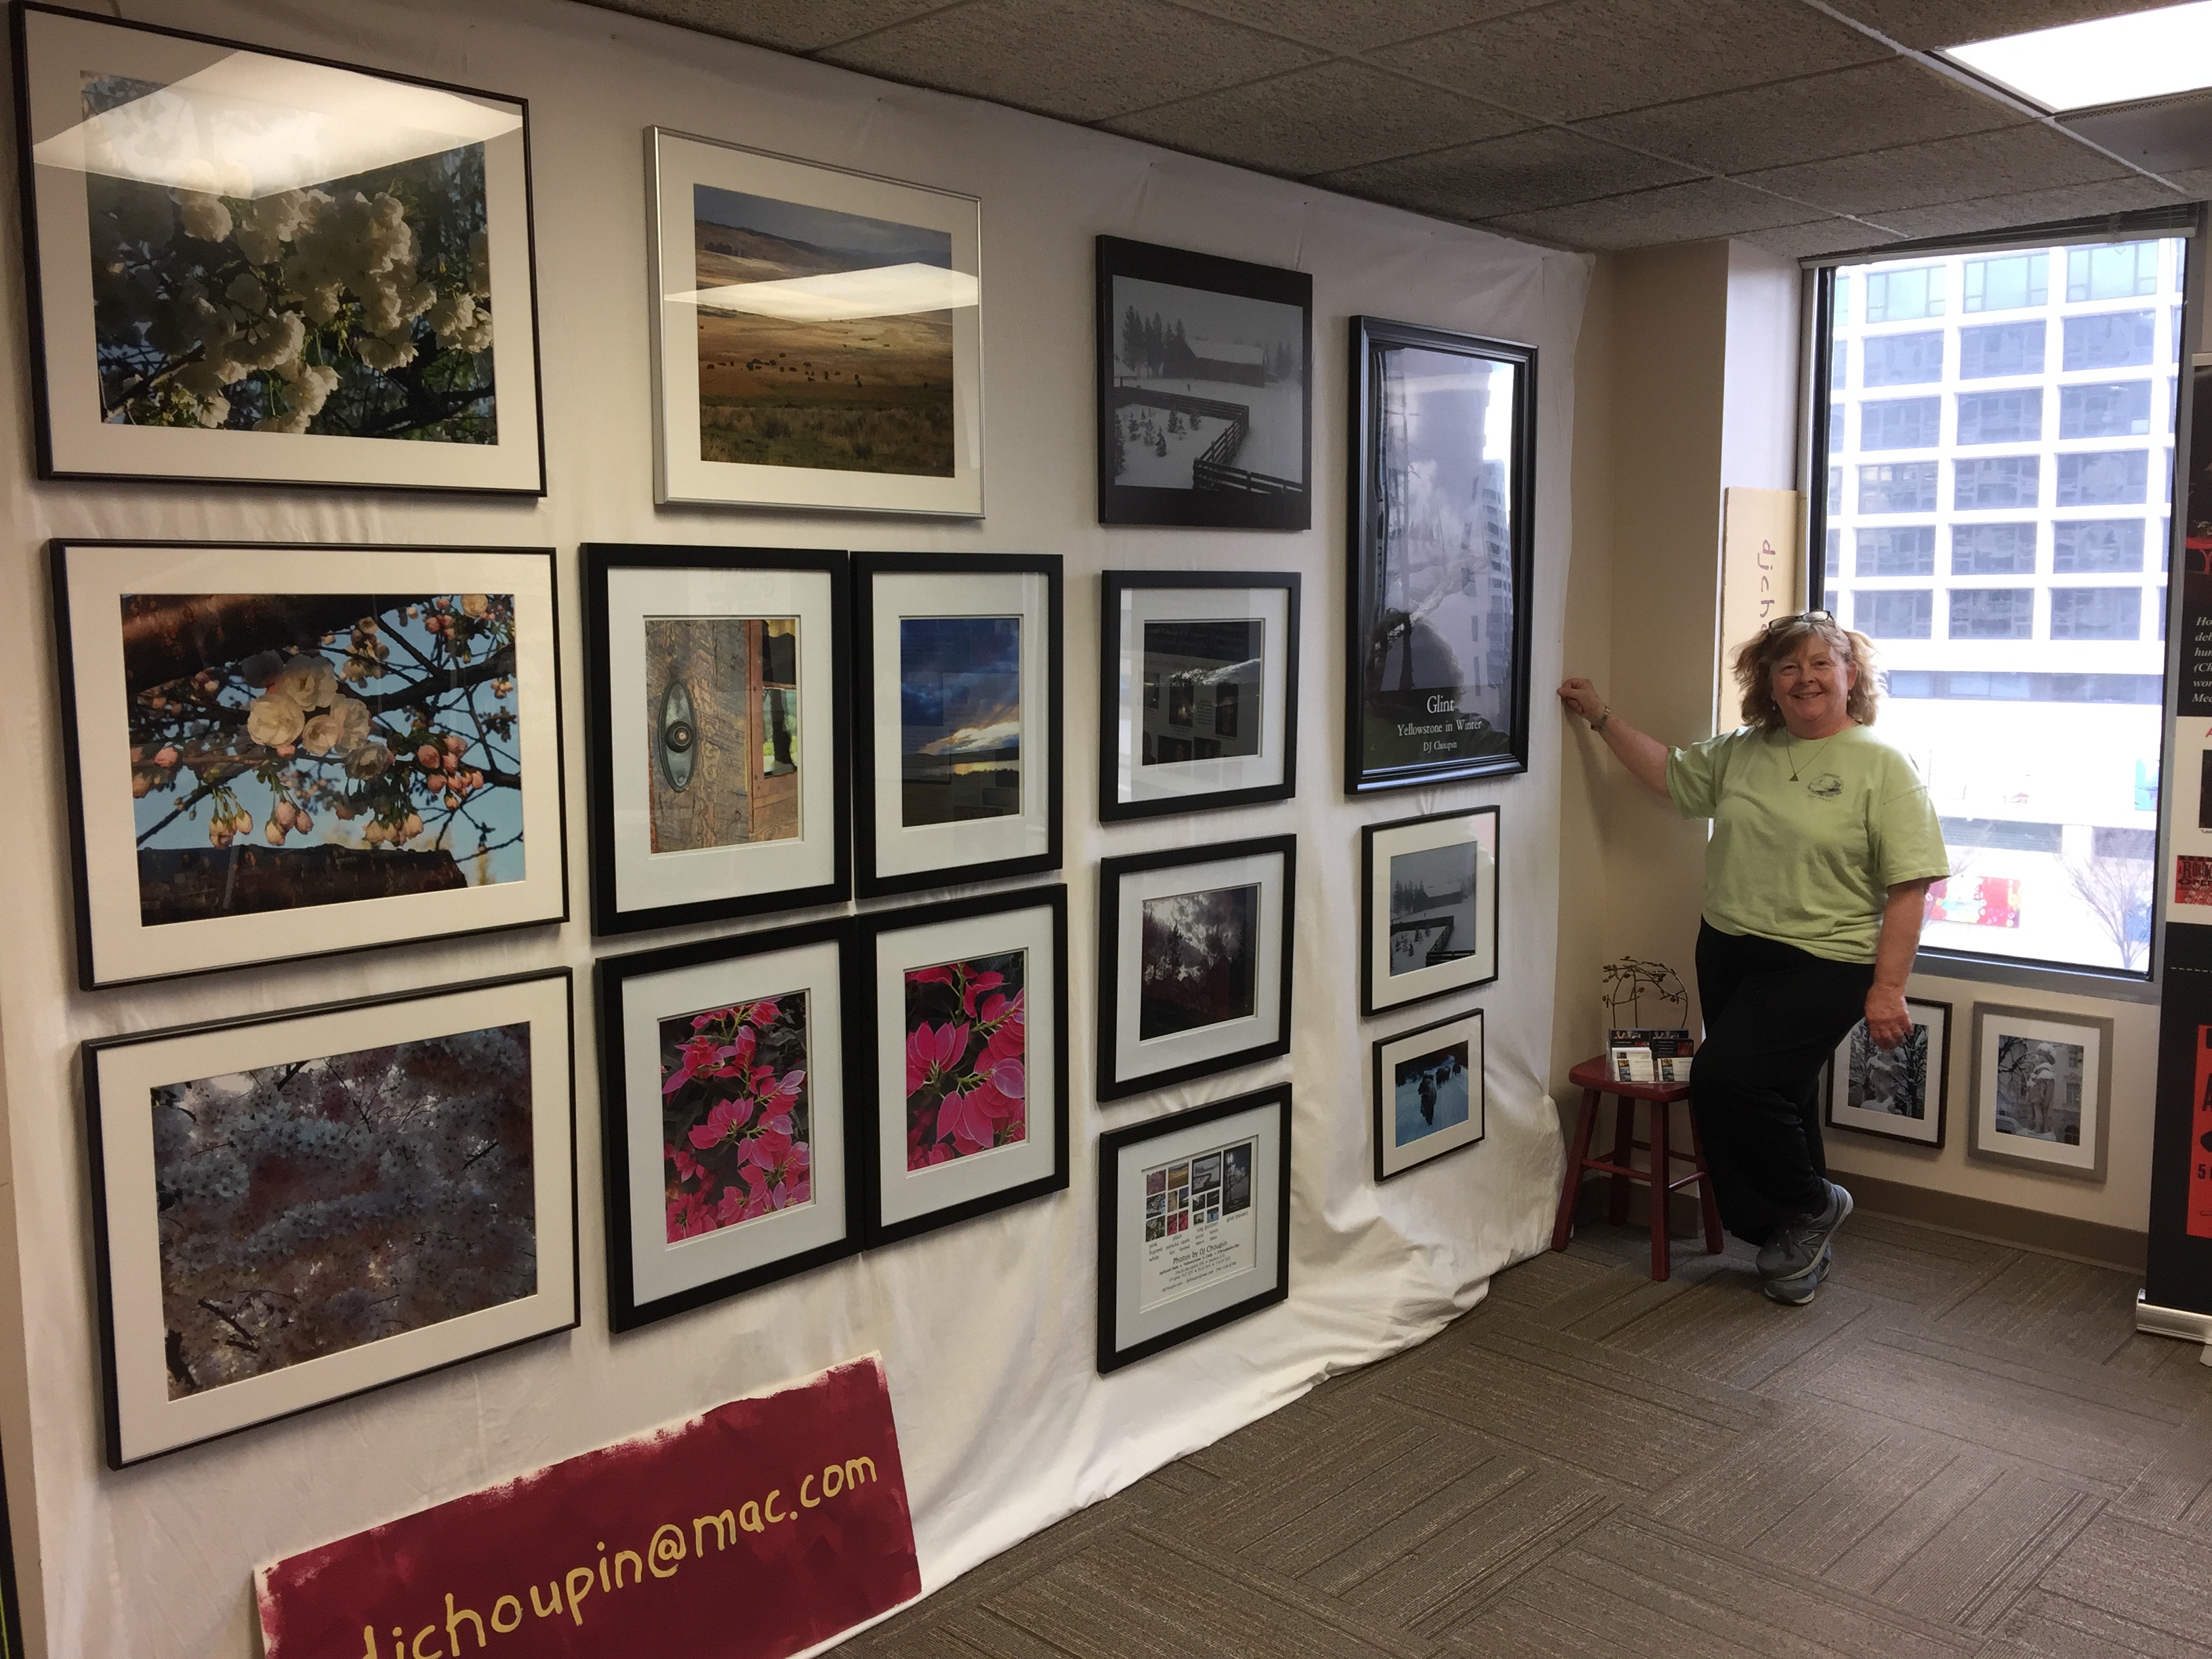 Photo of DJ Choupin's at the installation of her exhibit at Artomatic 2017 in Crystal City, Virginia.